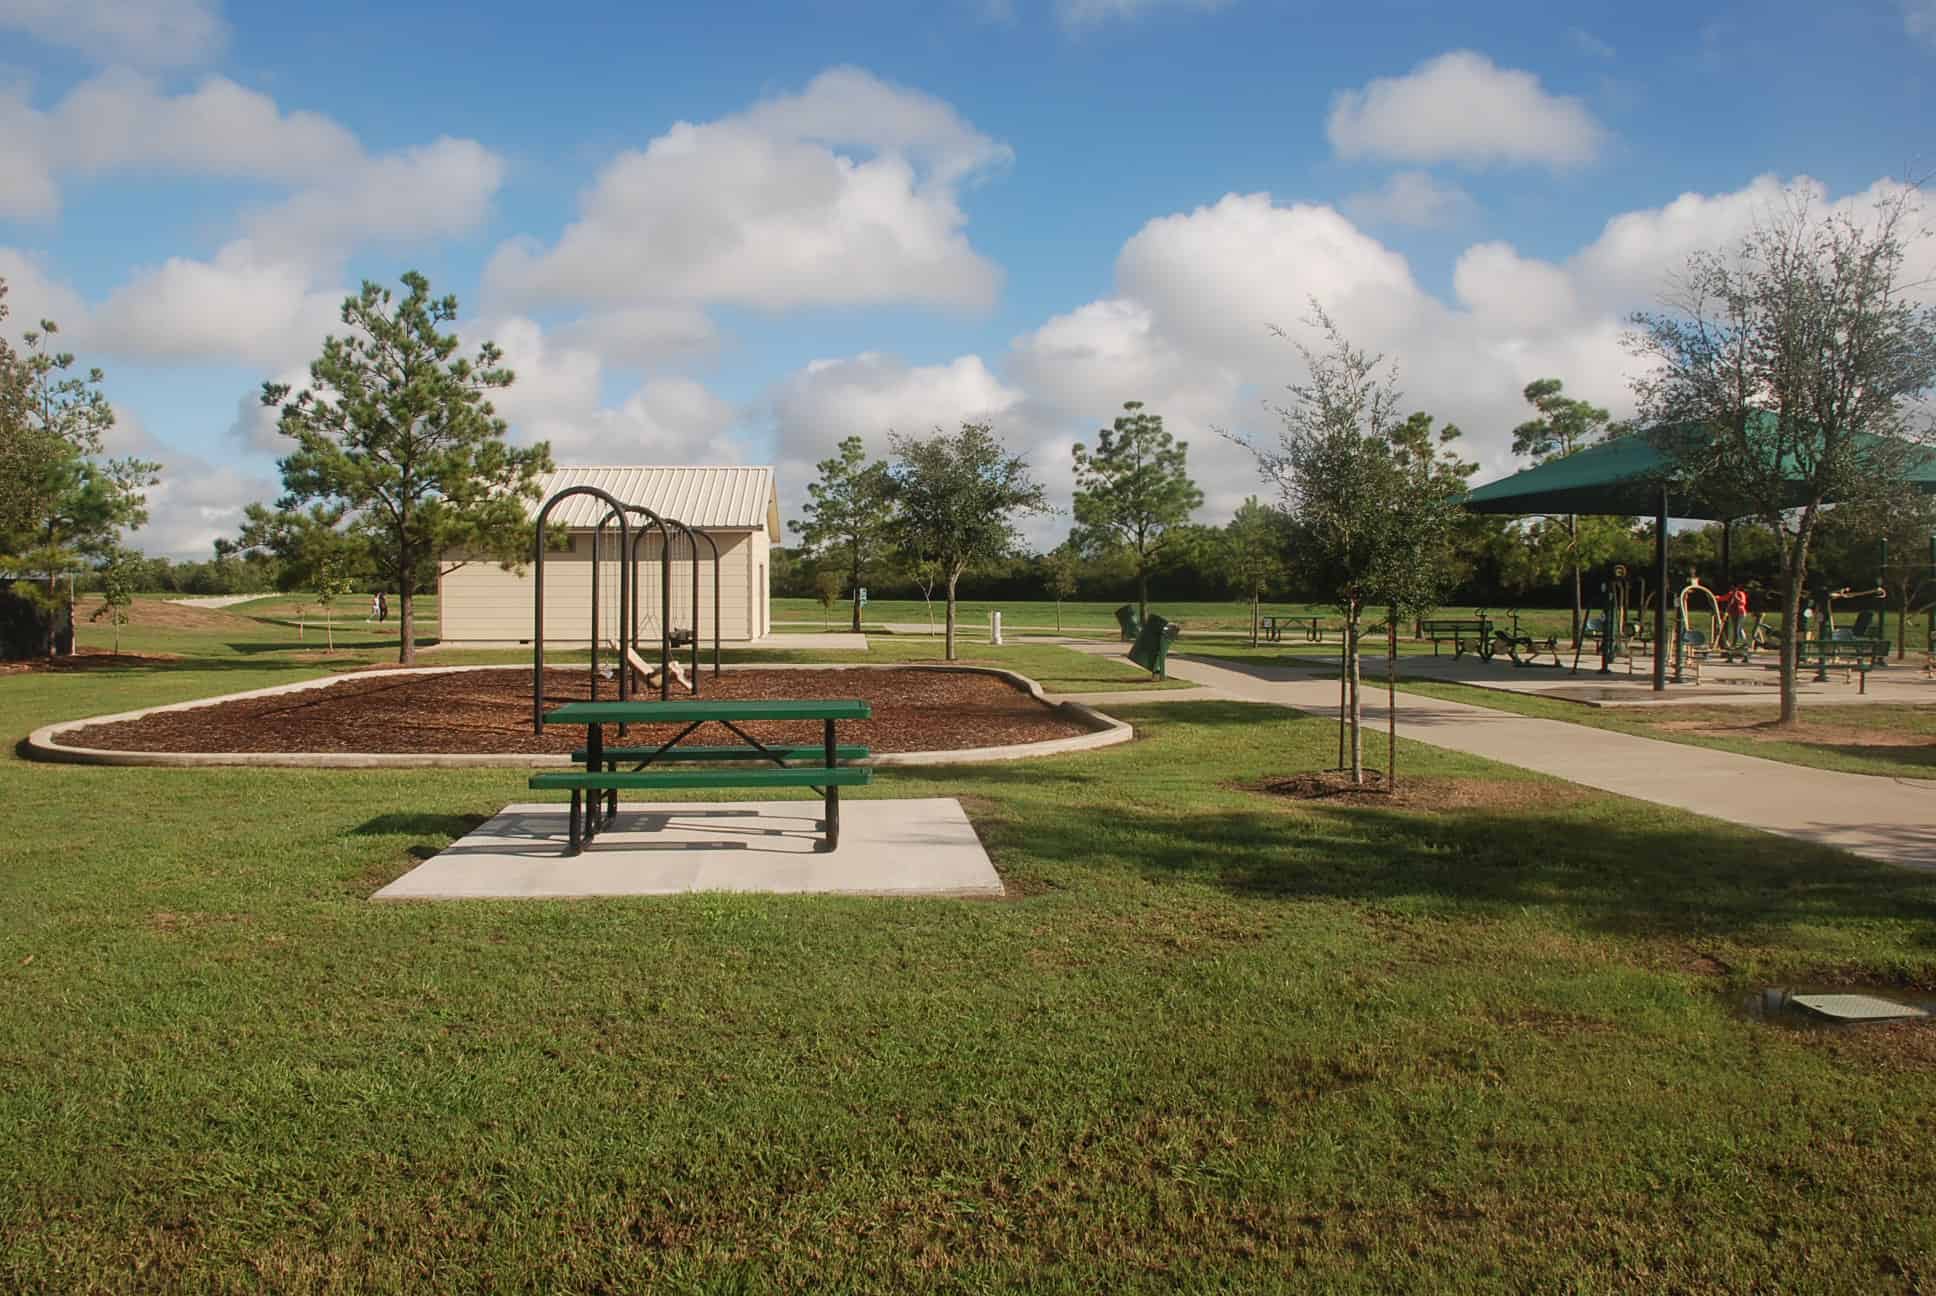 Swingset and Picnic Area adjacent to Fitness Area